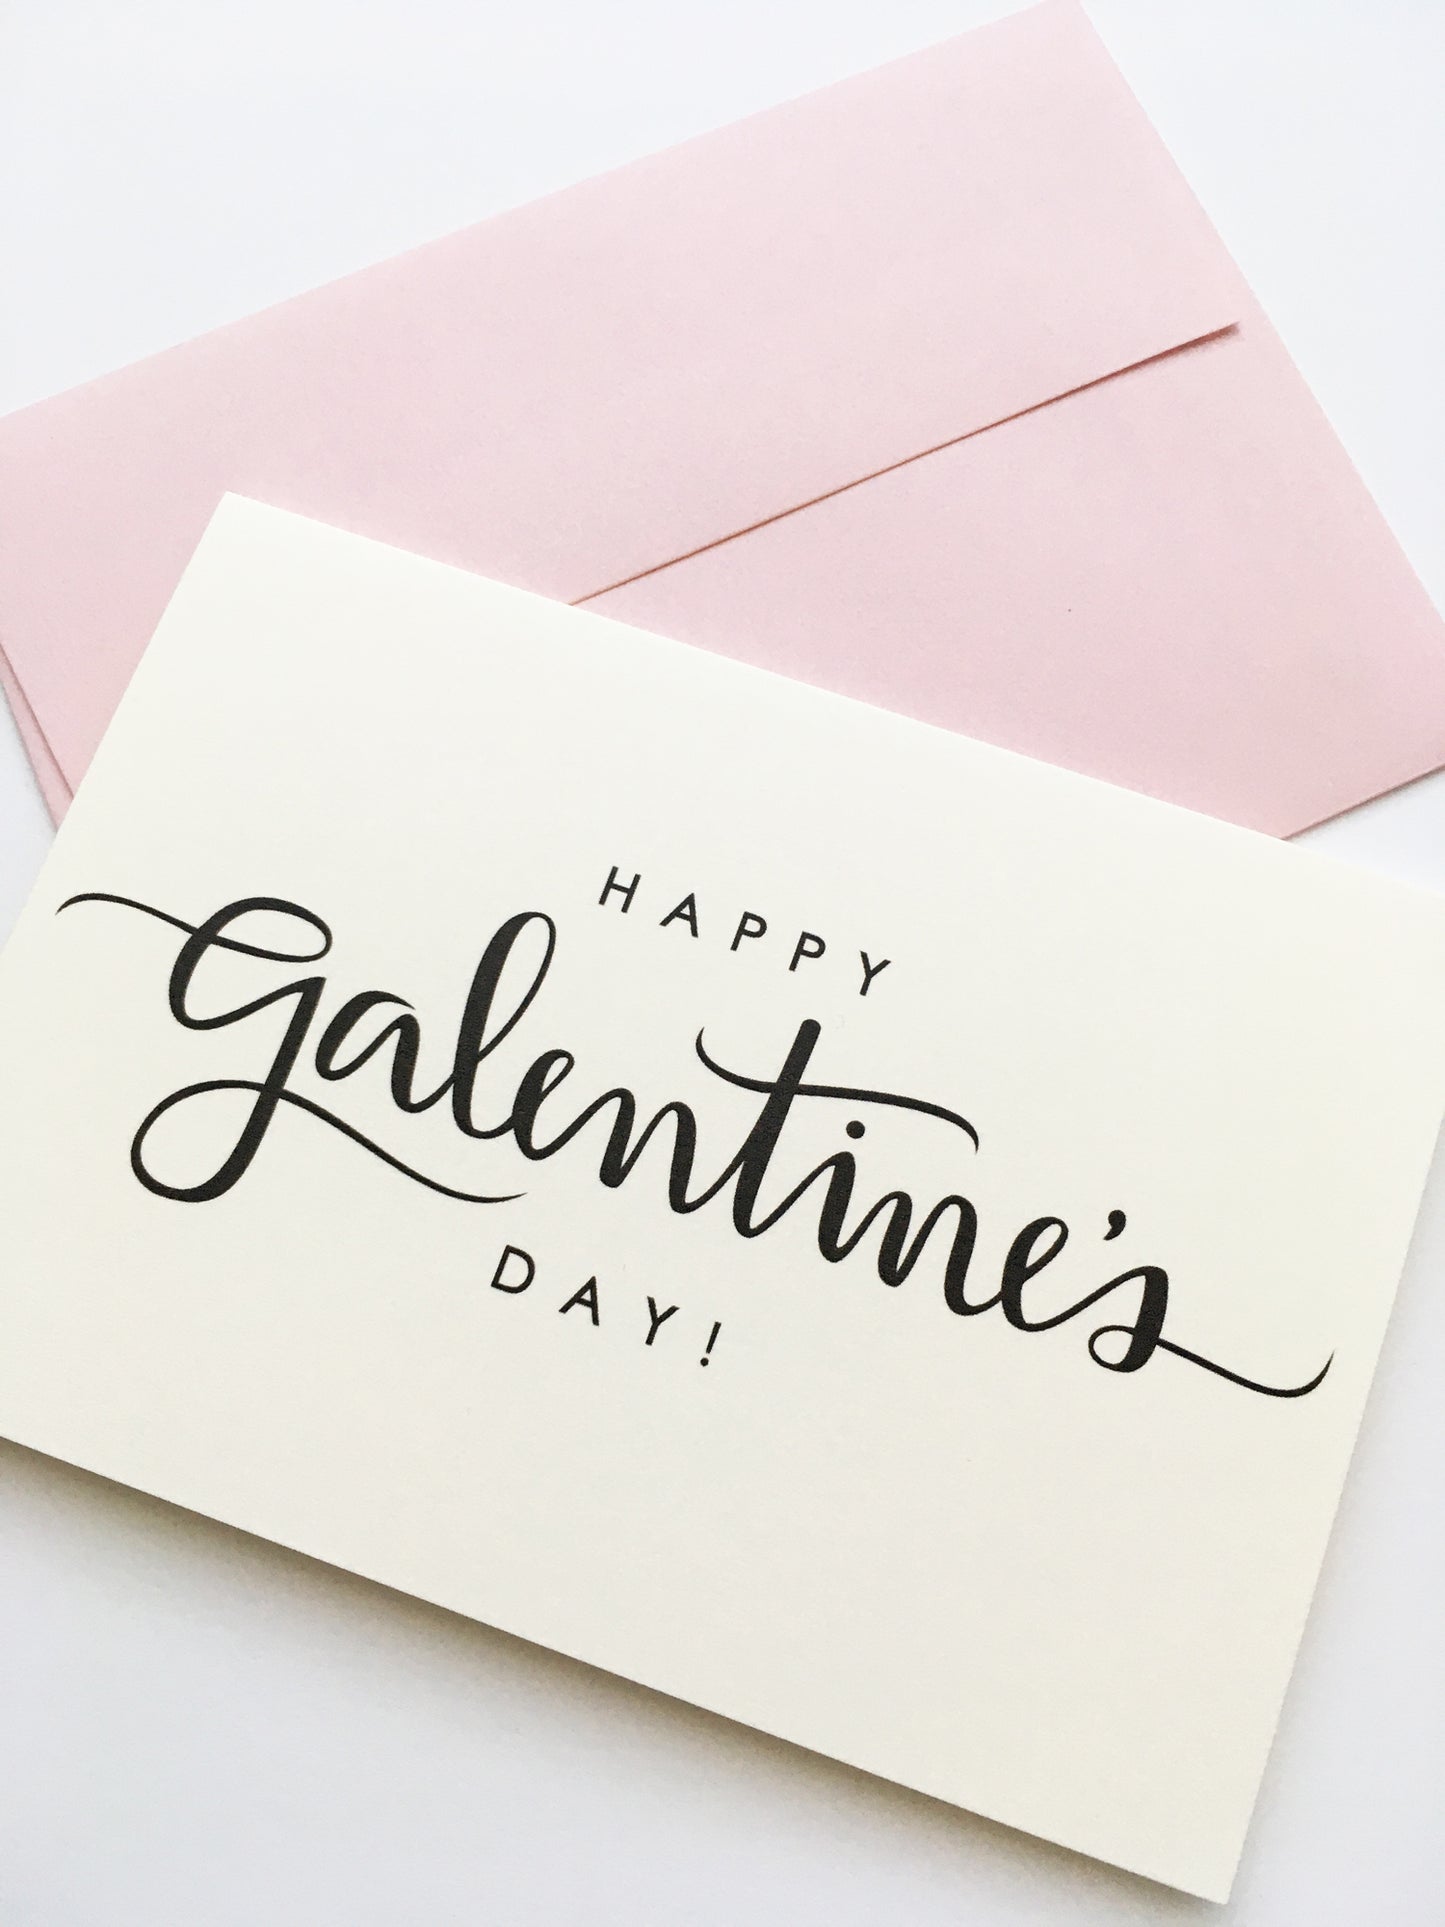 SECONDS SALE! Set of 6 - A1 Happy Galentine's Day Card